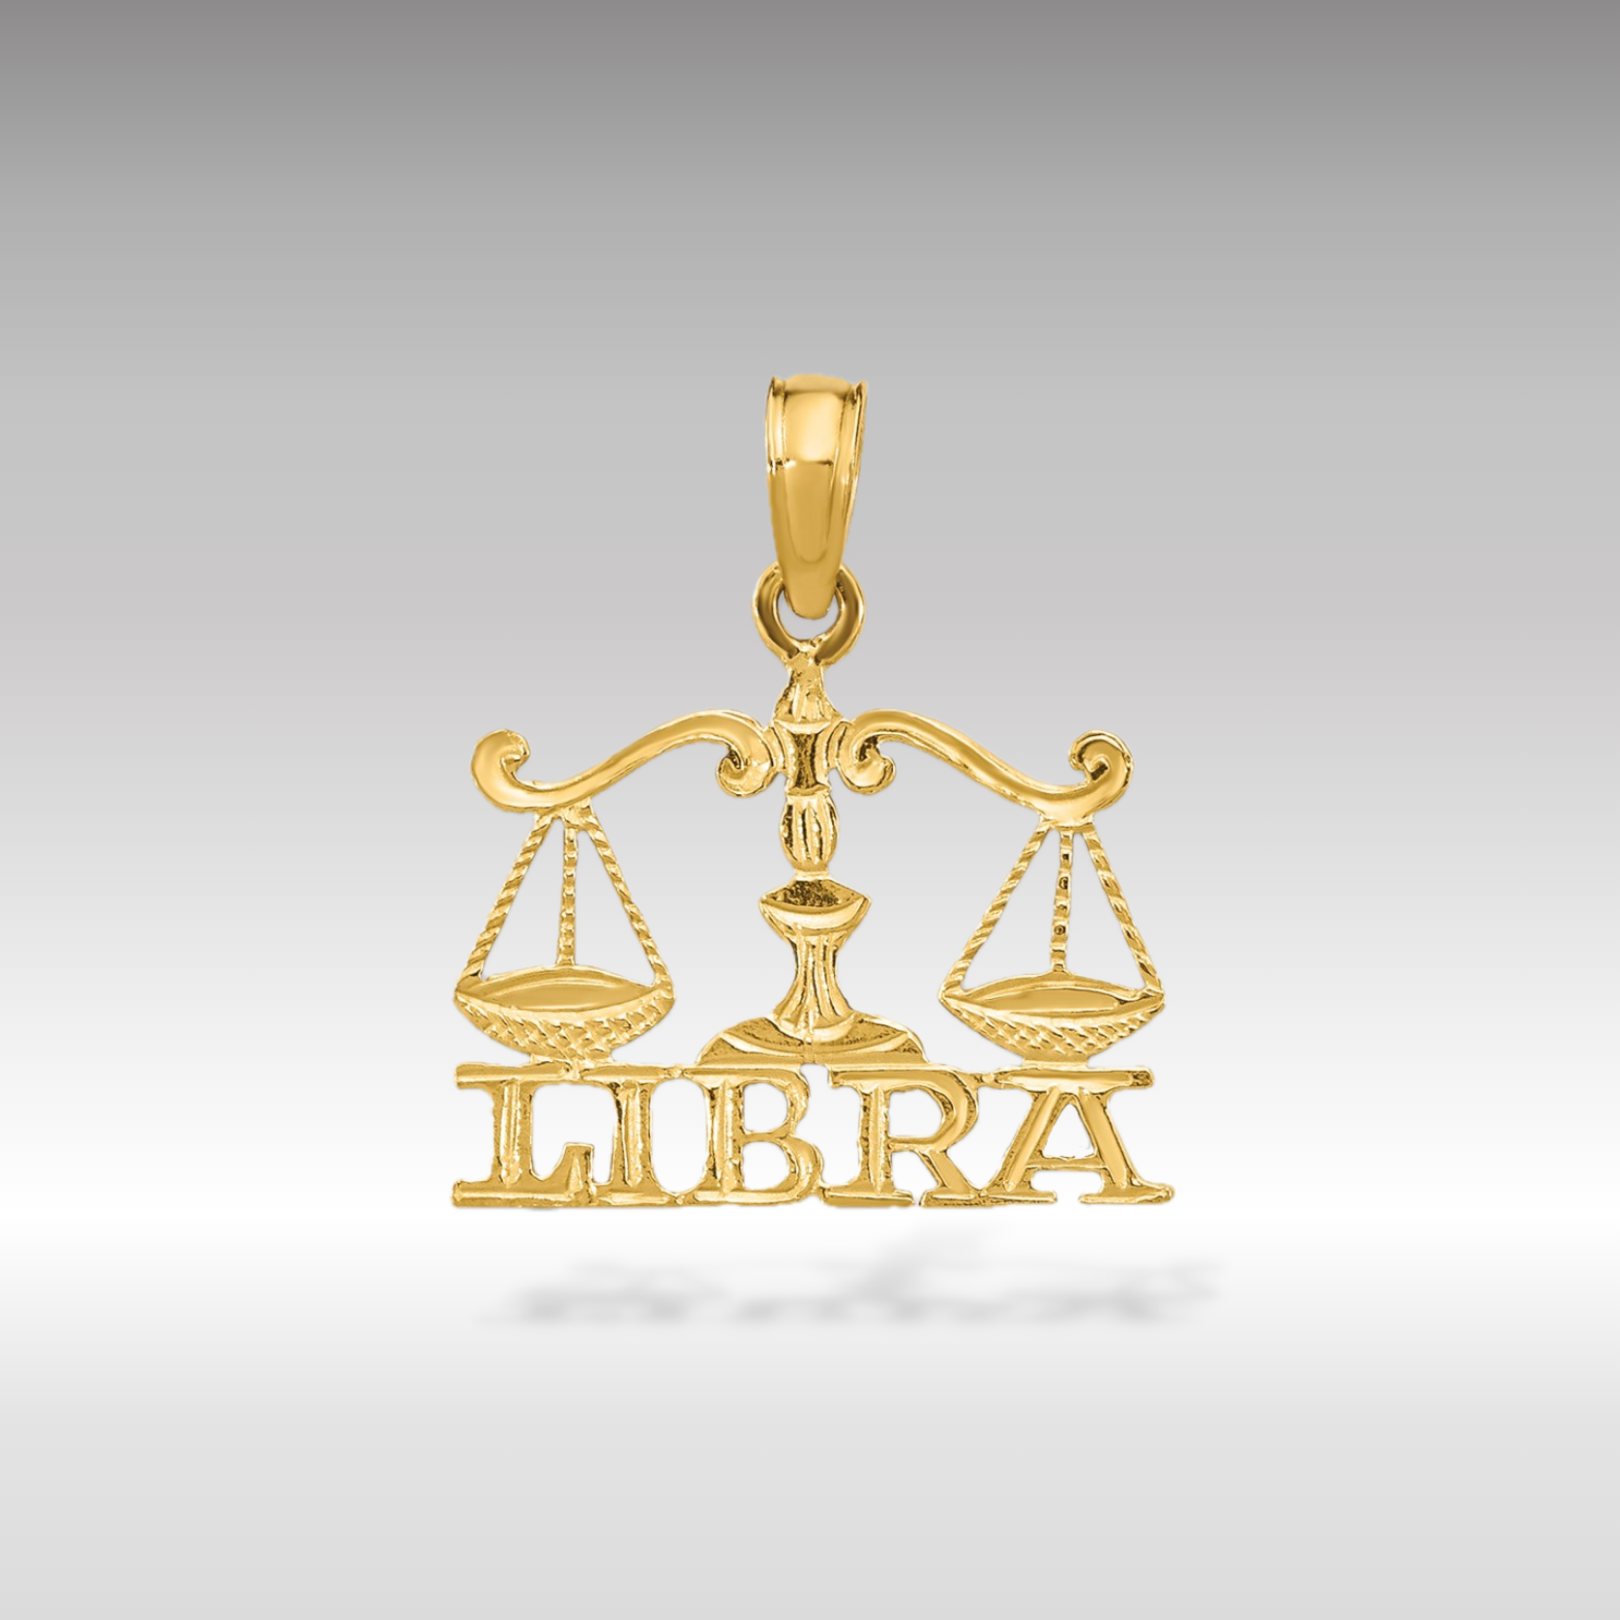 14K Gold LIBRA Scales of Justice Zodiac Charm - Charlie & Co. Jewelry